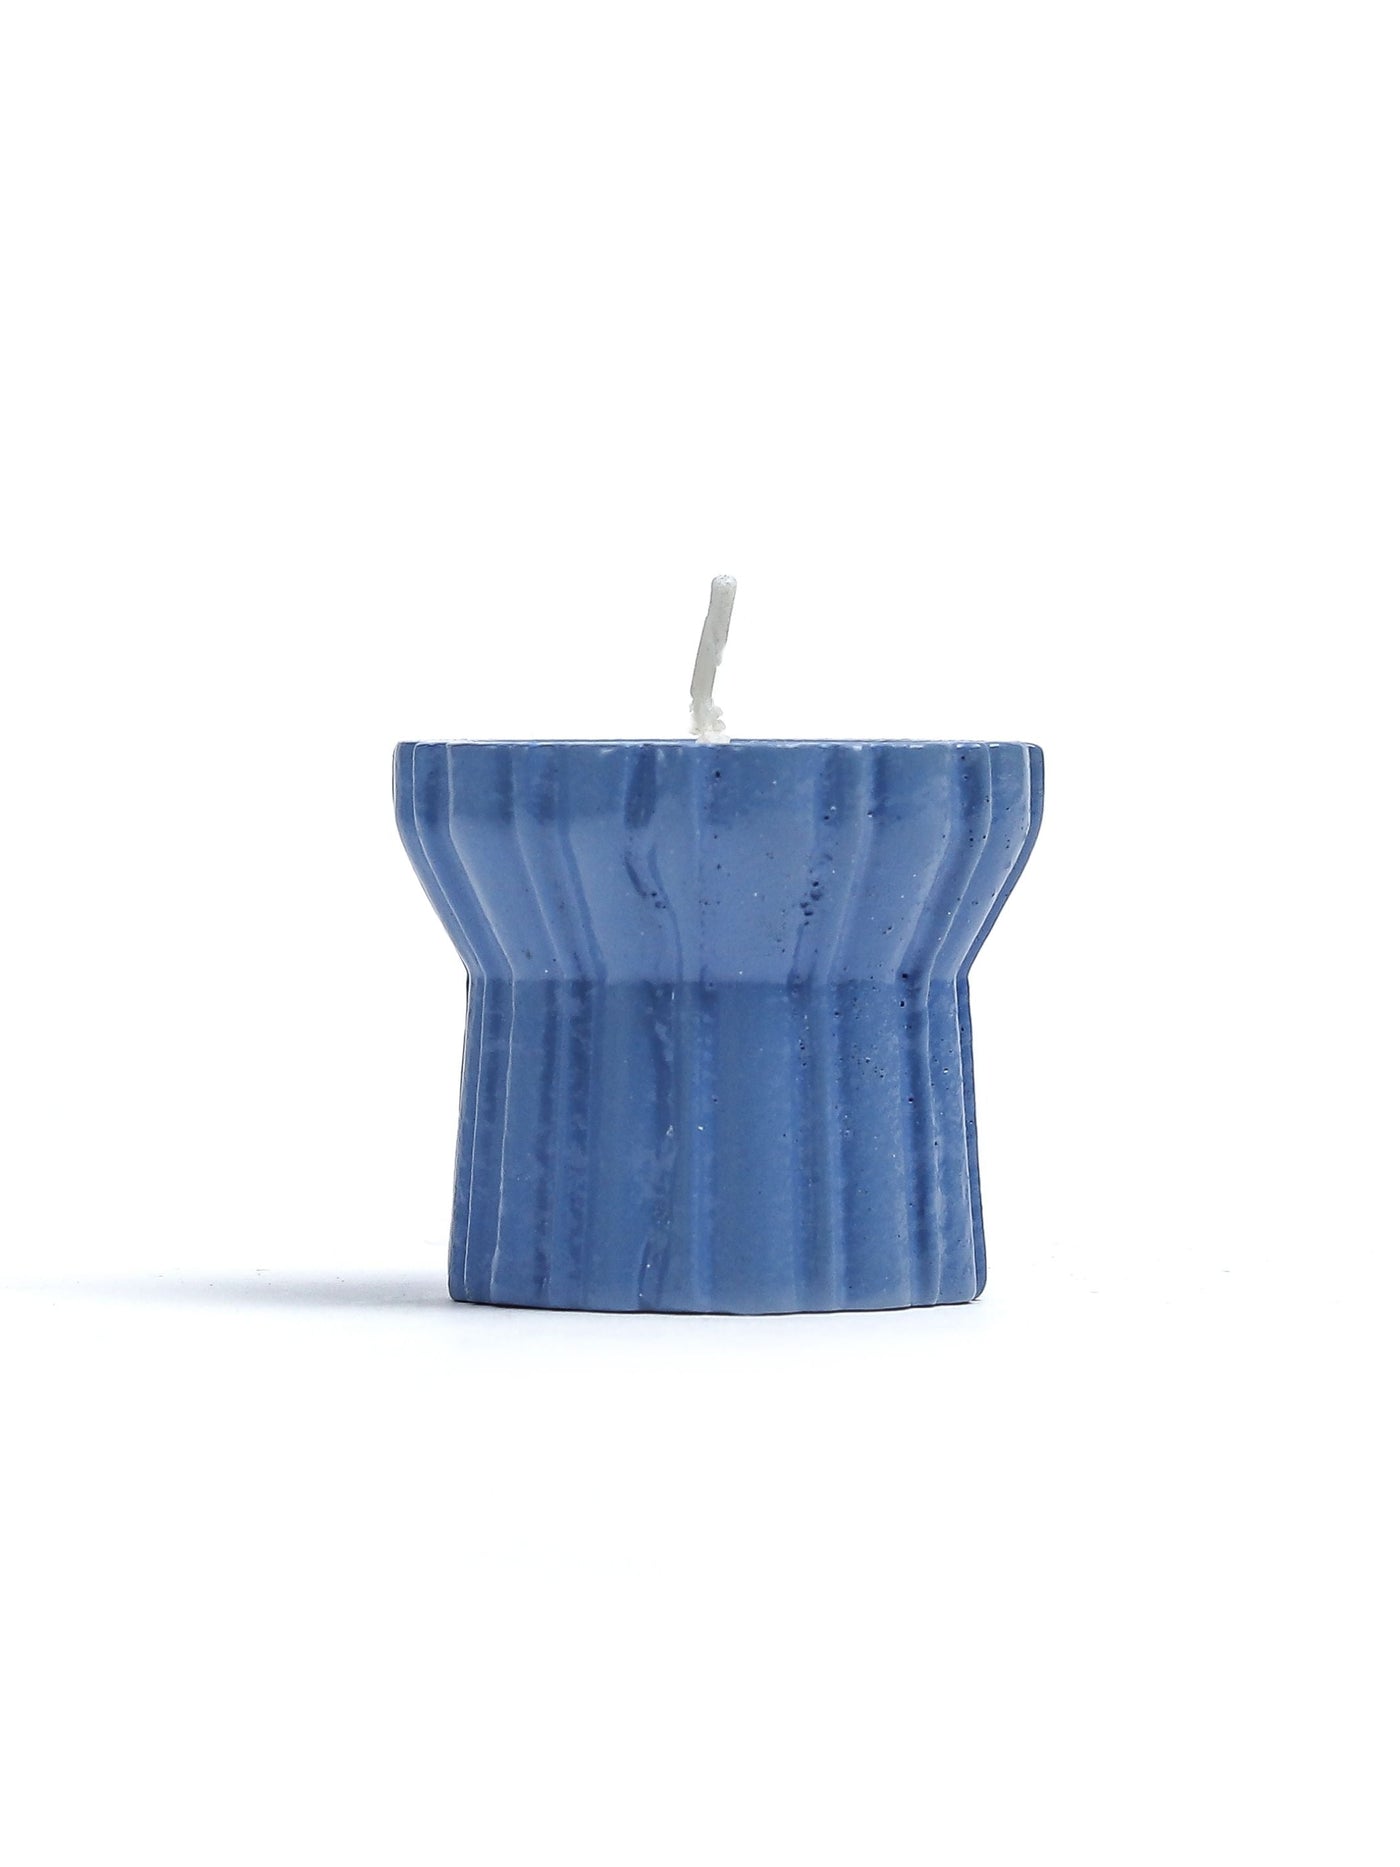 Qutub Azure Blue Candle Stand